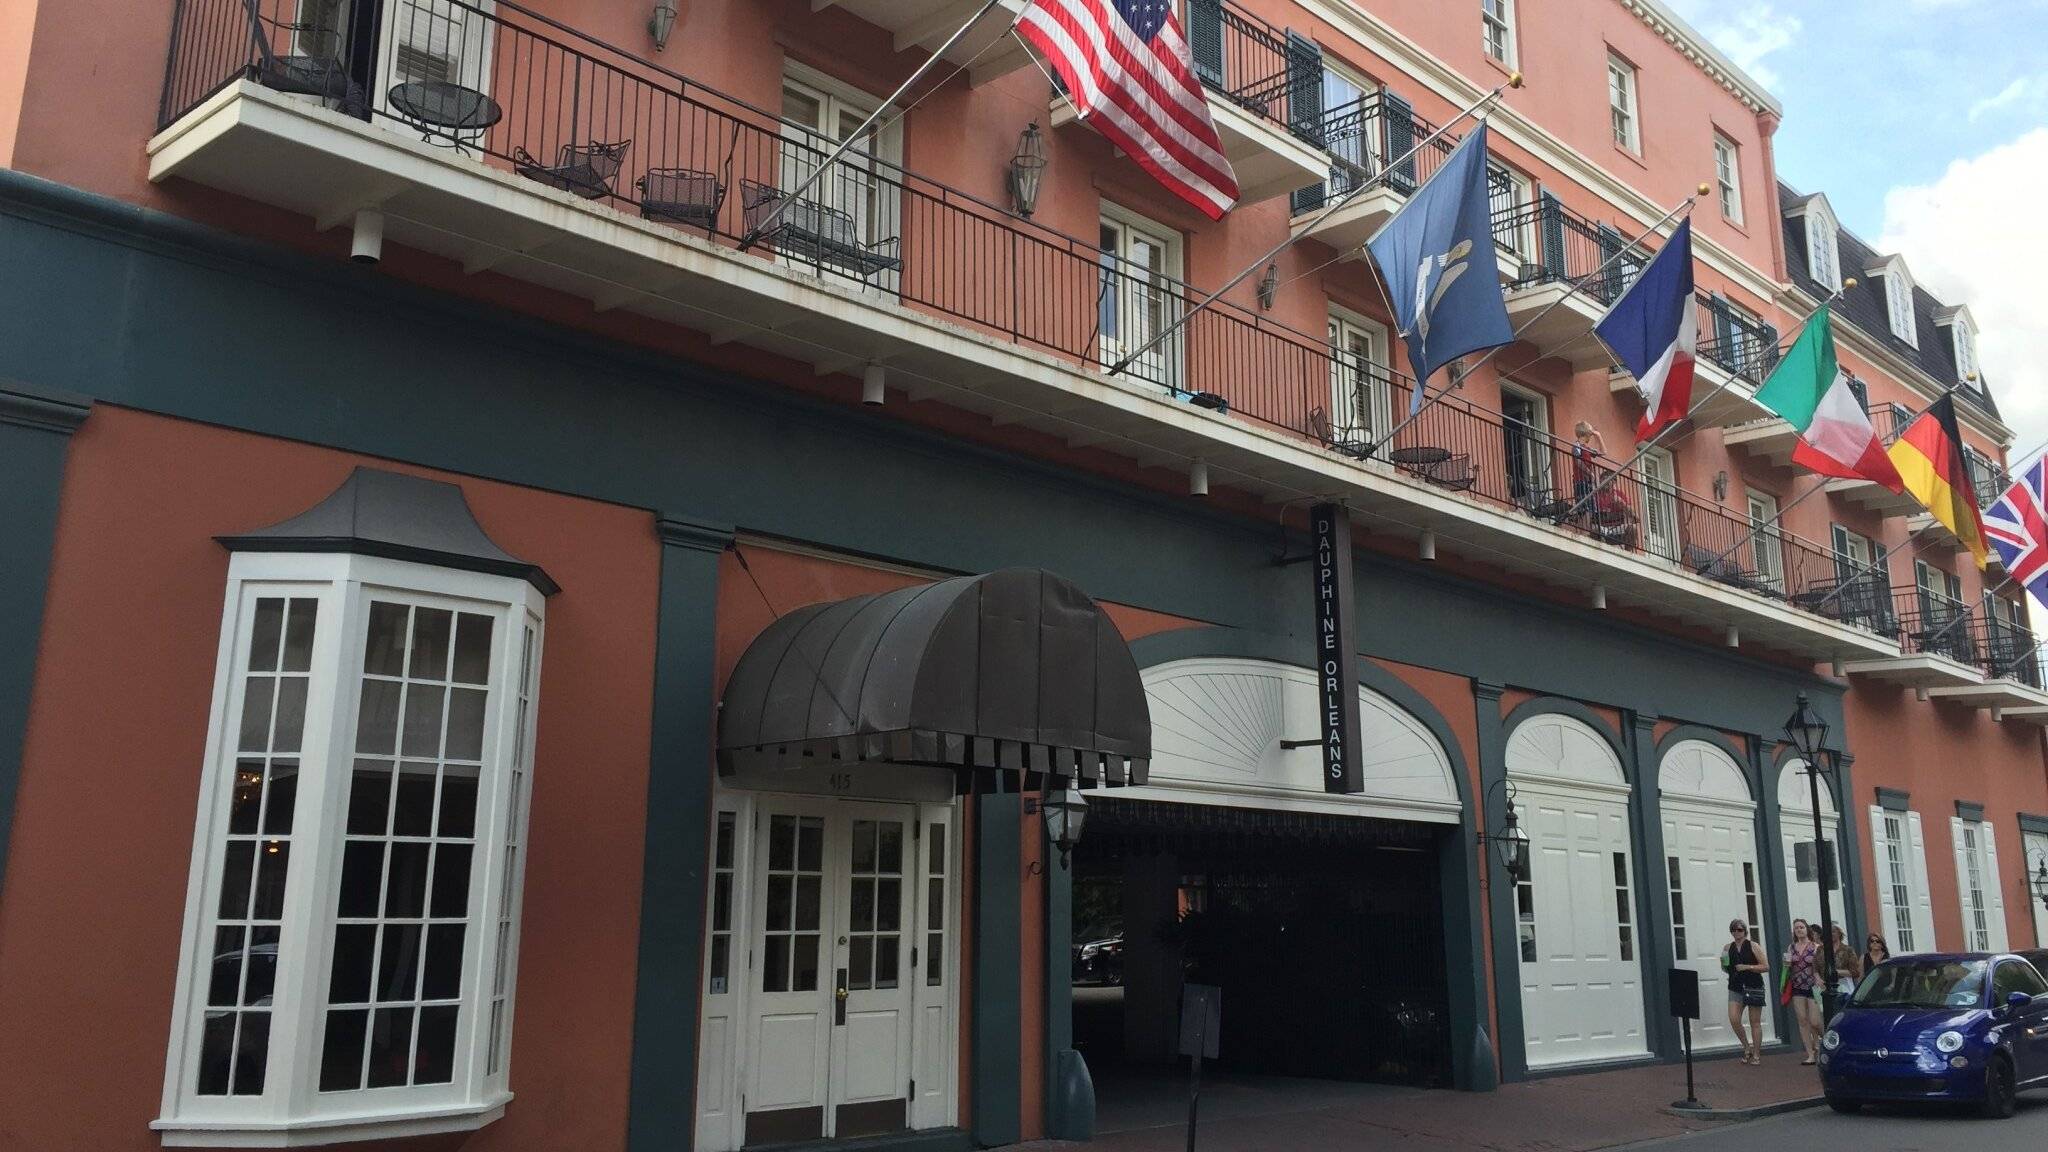 Dauphine Orleans Hotel, 18th Century: A Beautiful Retreat in the Heart of New Orleans